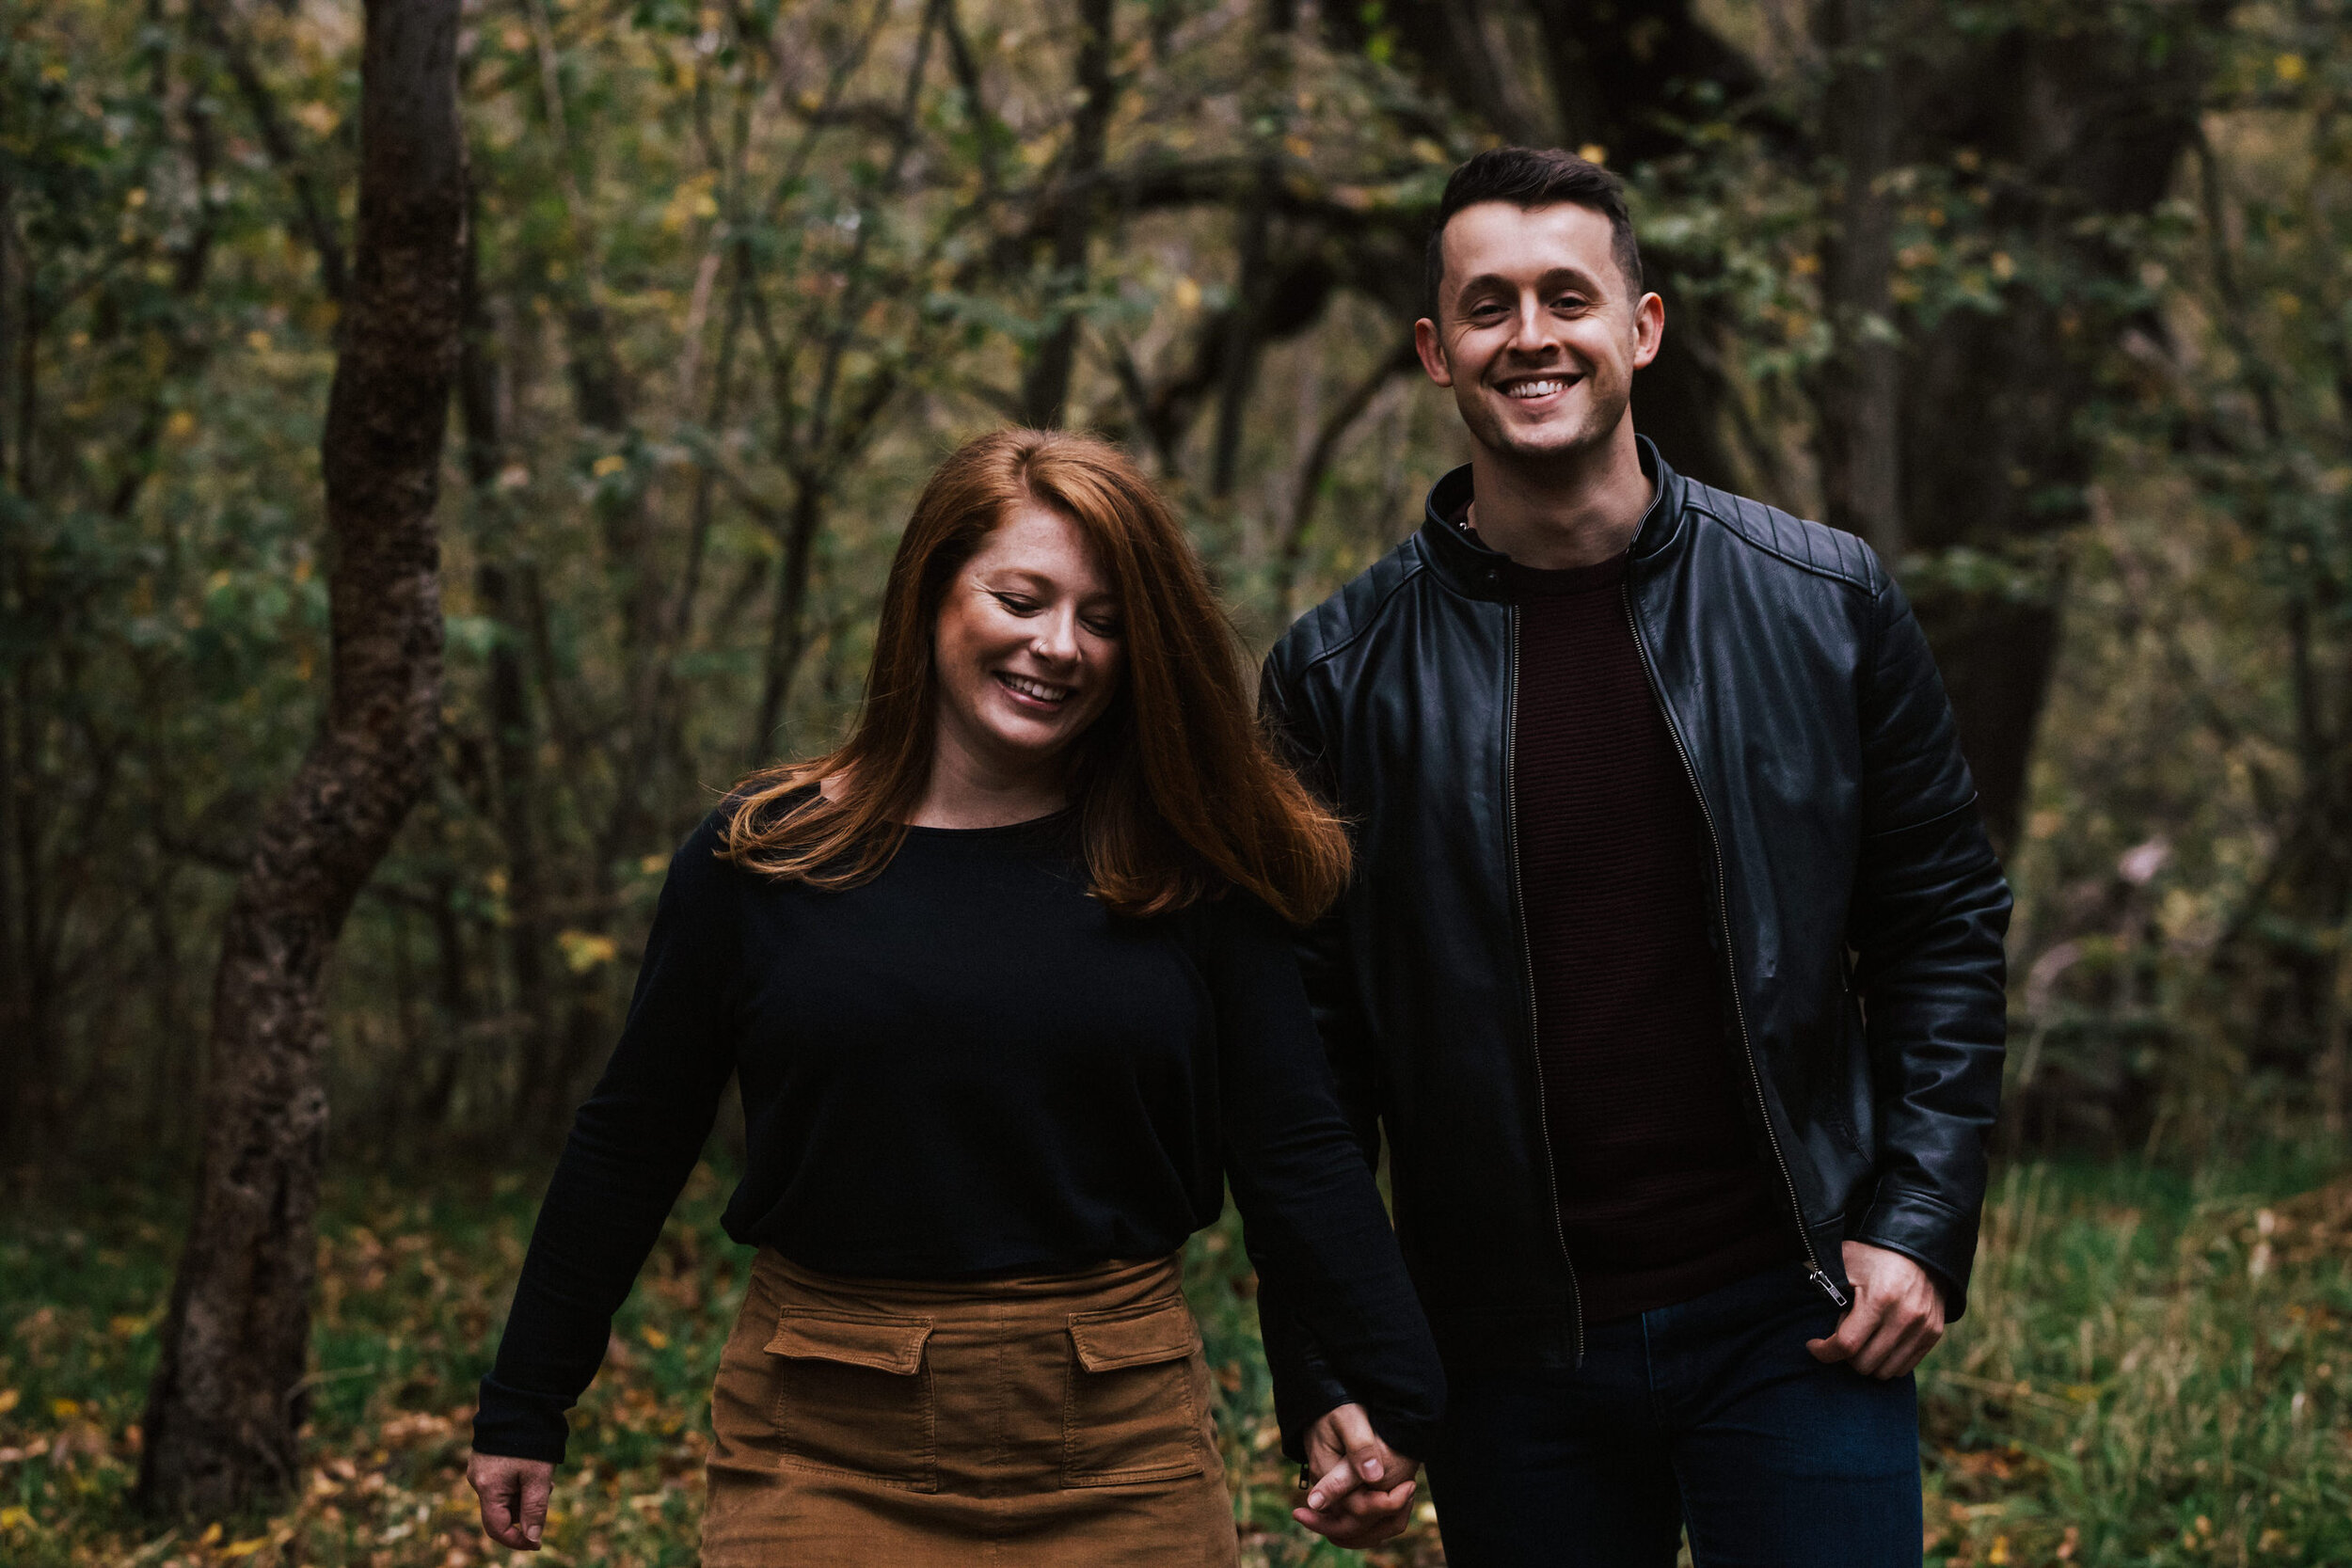 Wintery Autumn Adelaide Hills Engagement Session 13.JPG